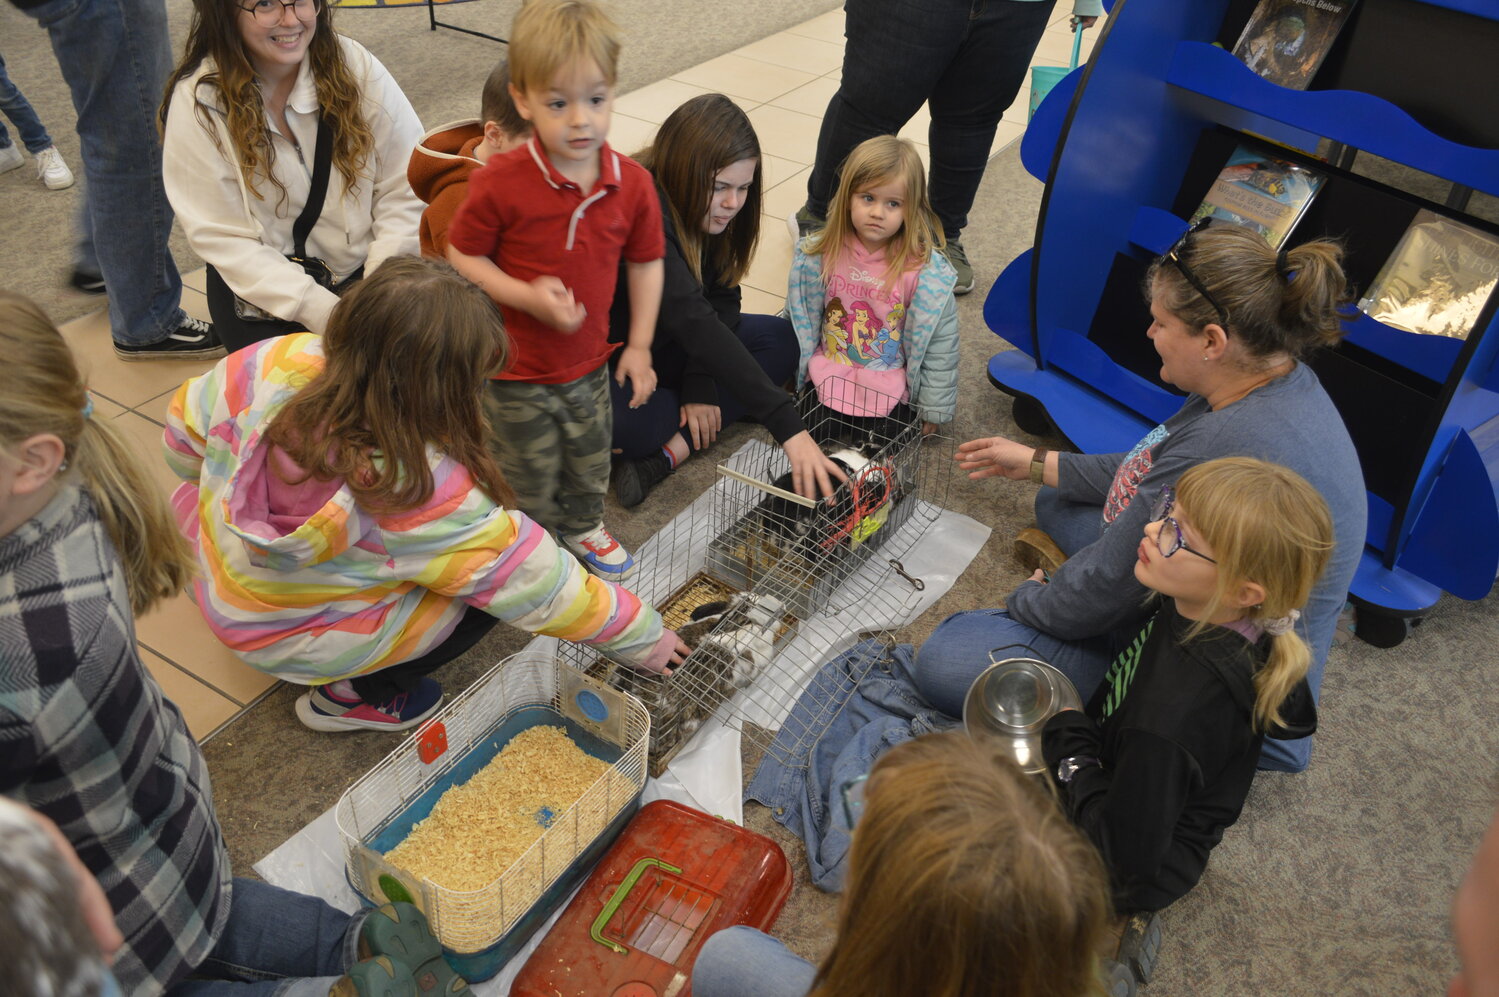 The Crawfordsville District Public Library held "Bunny Day" for kids of all ages on Sunday. Kids were allowed to be up close an interact with different bunnies.